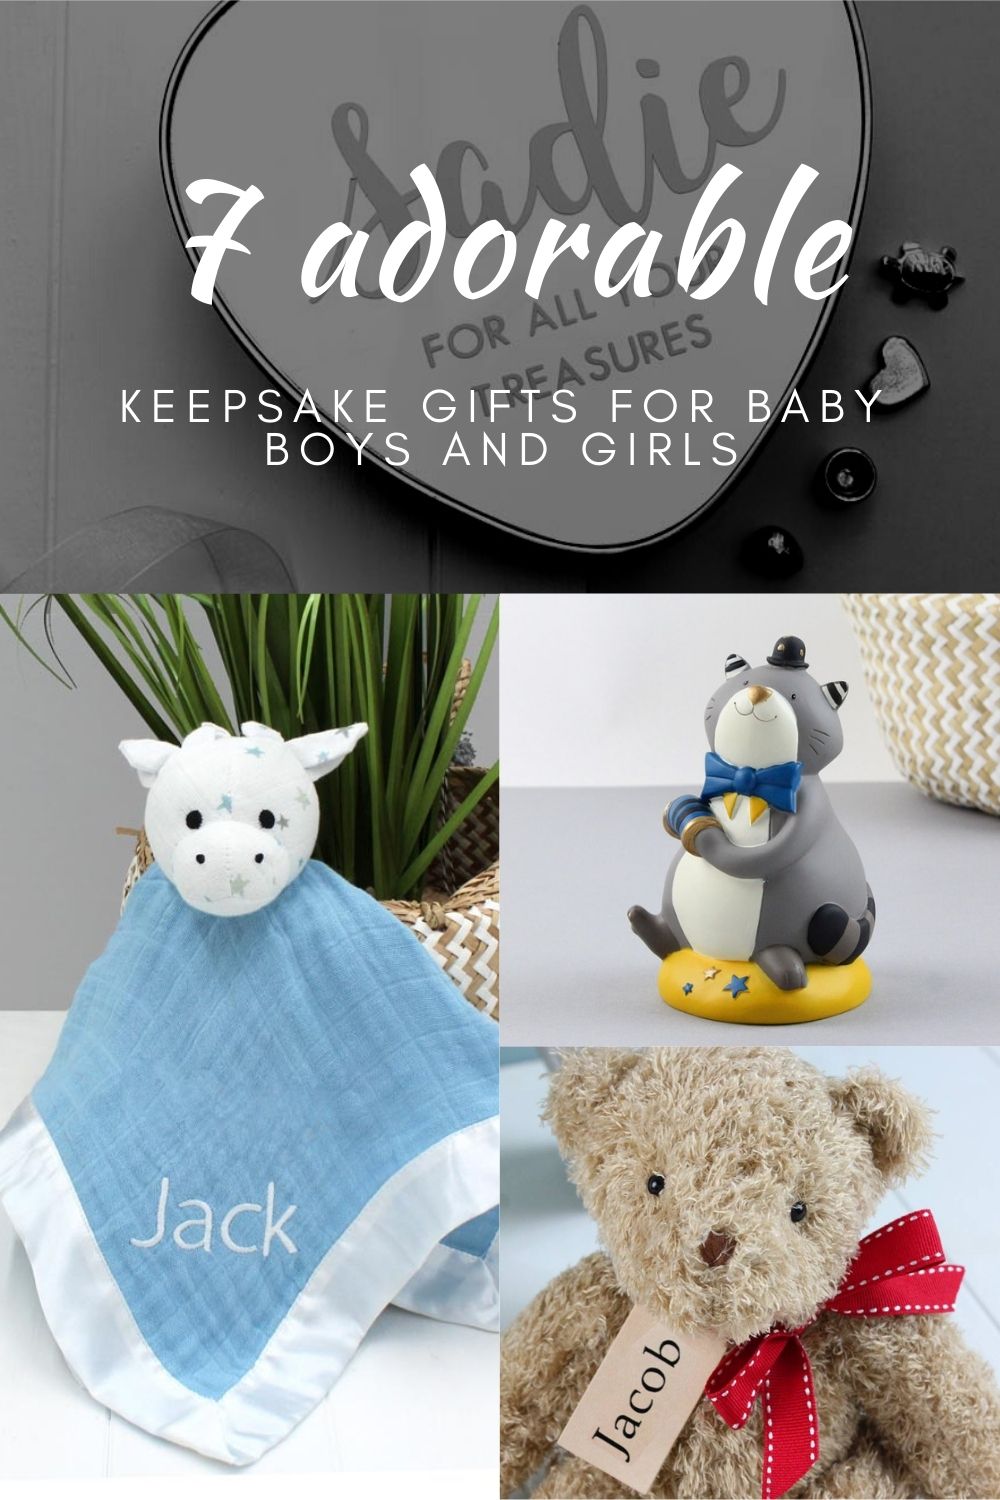 7 Adorable Keepsake Gifts for Baby Boys and Girls